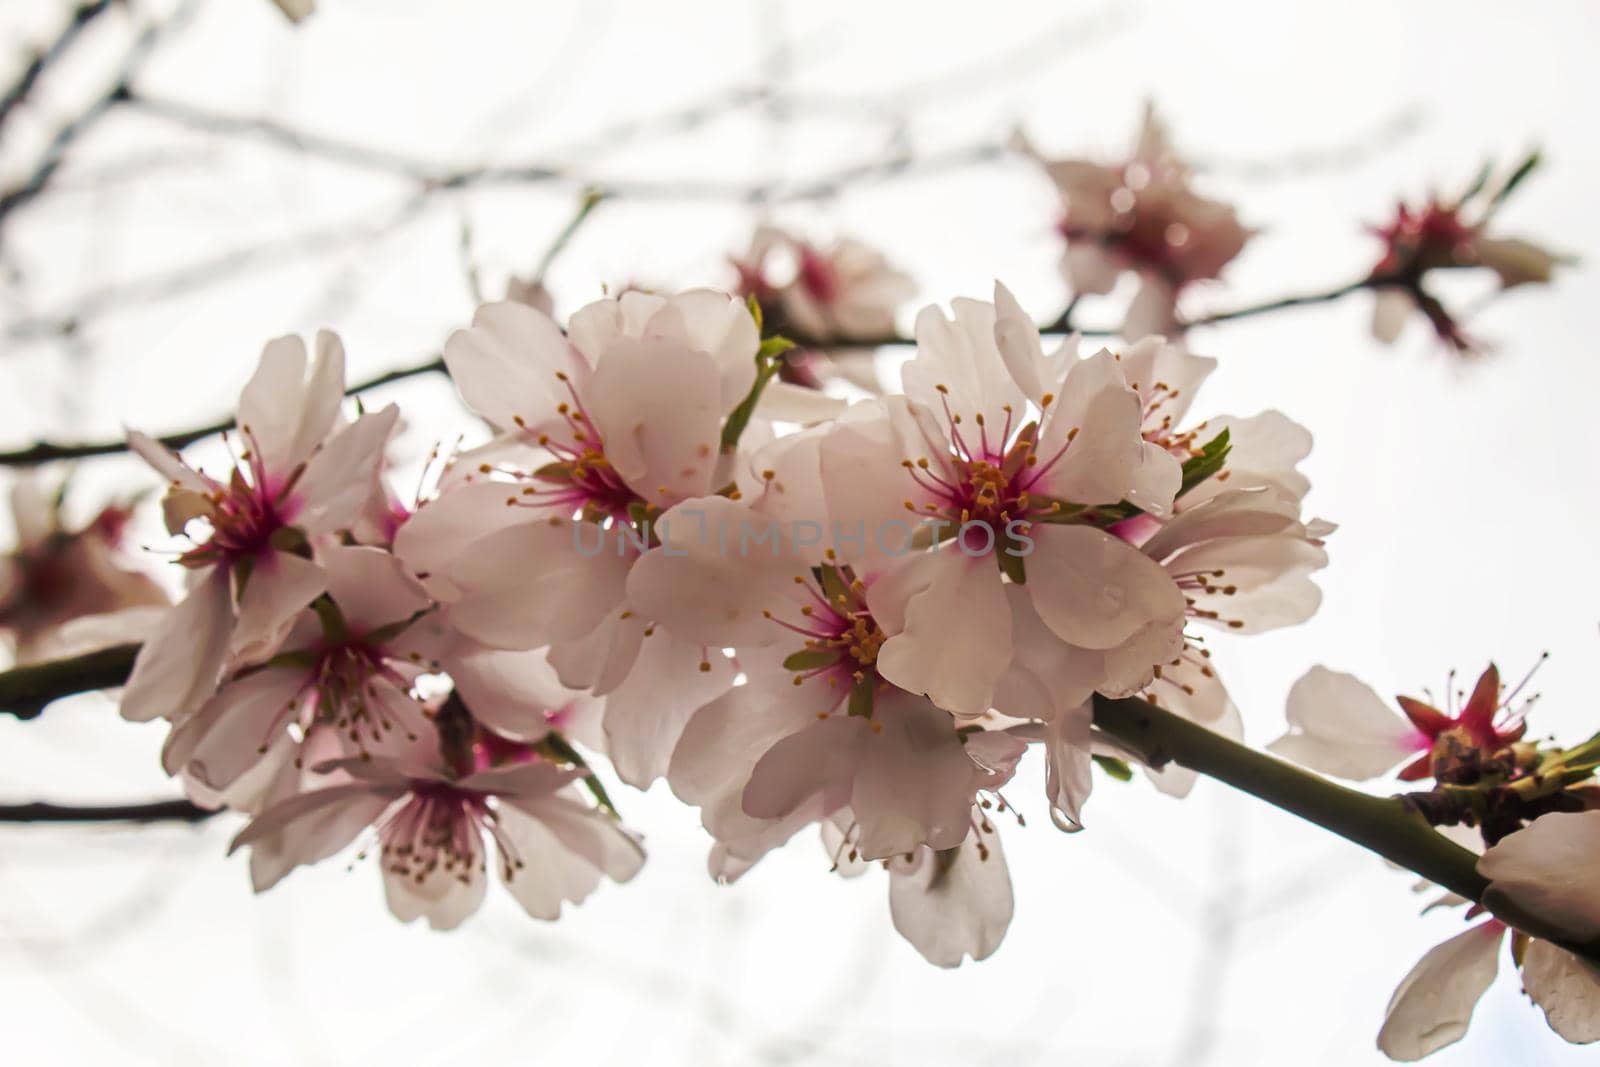 Blooming tree in spring. Fresh pink flowers on branch of fruit tree. Selective focus.nature